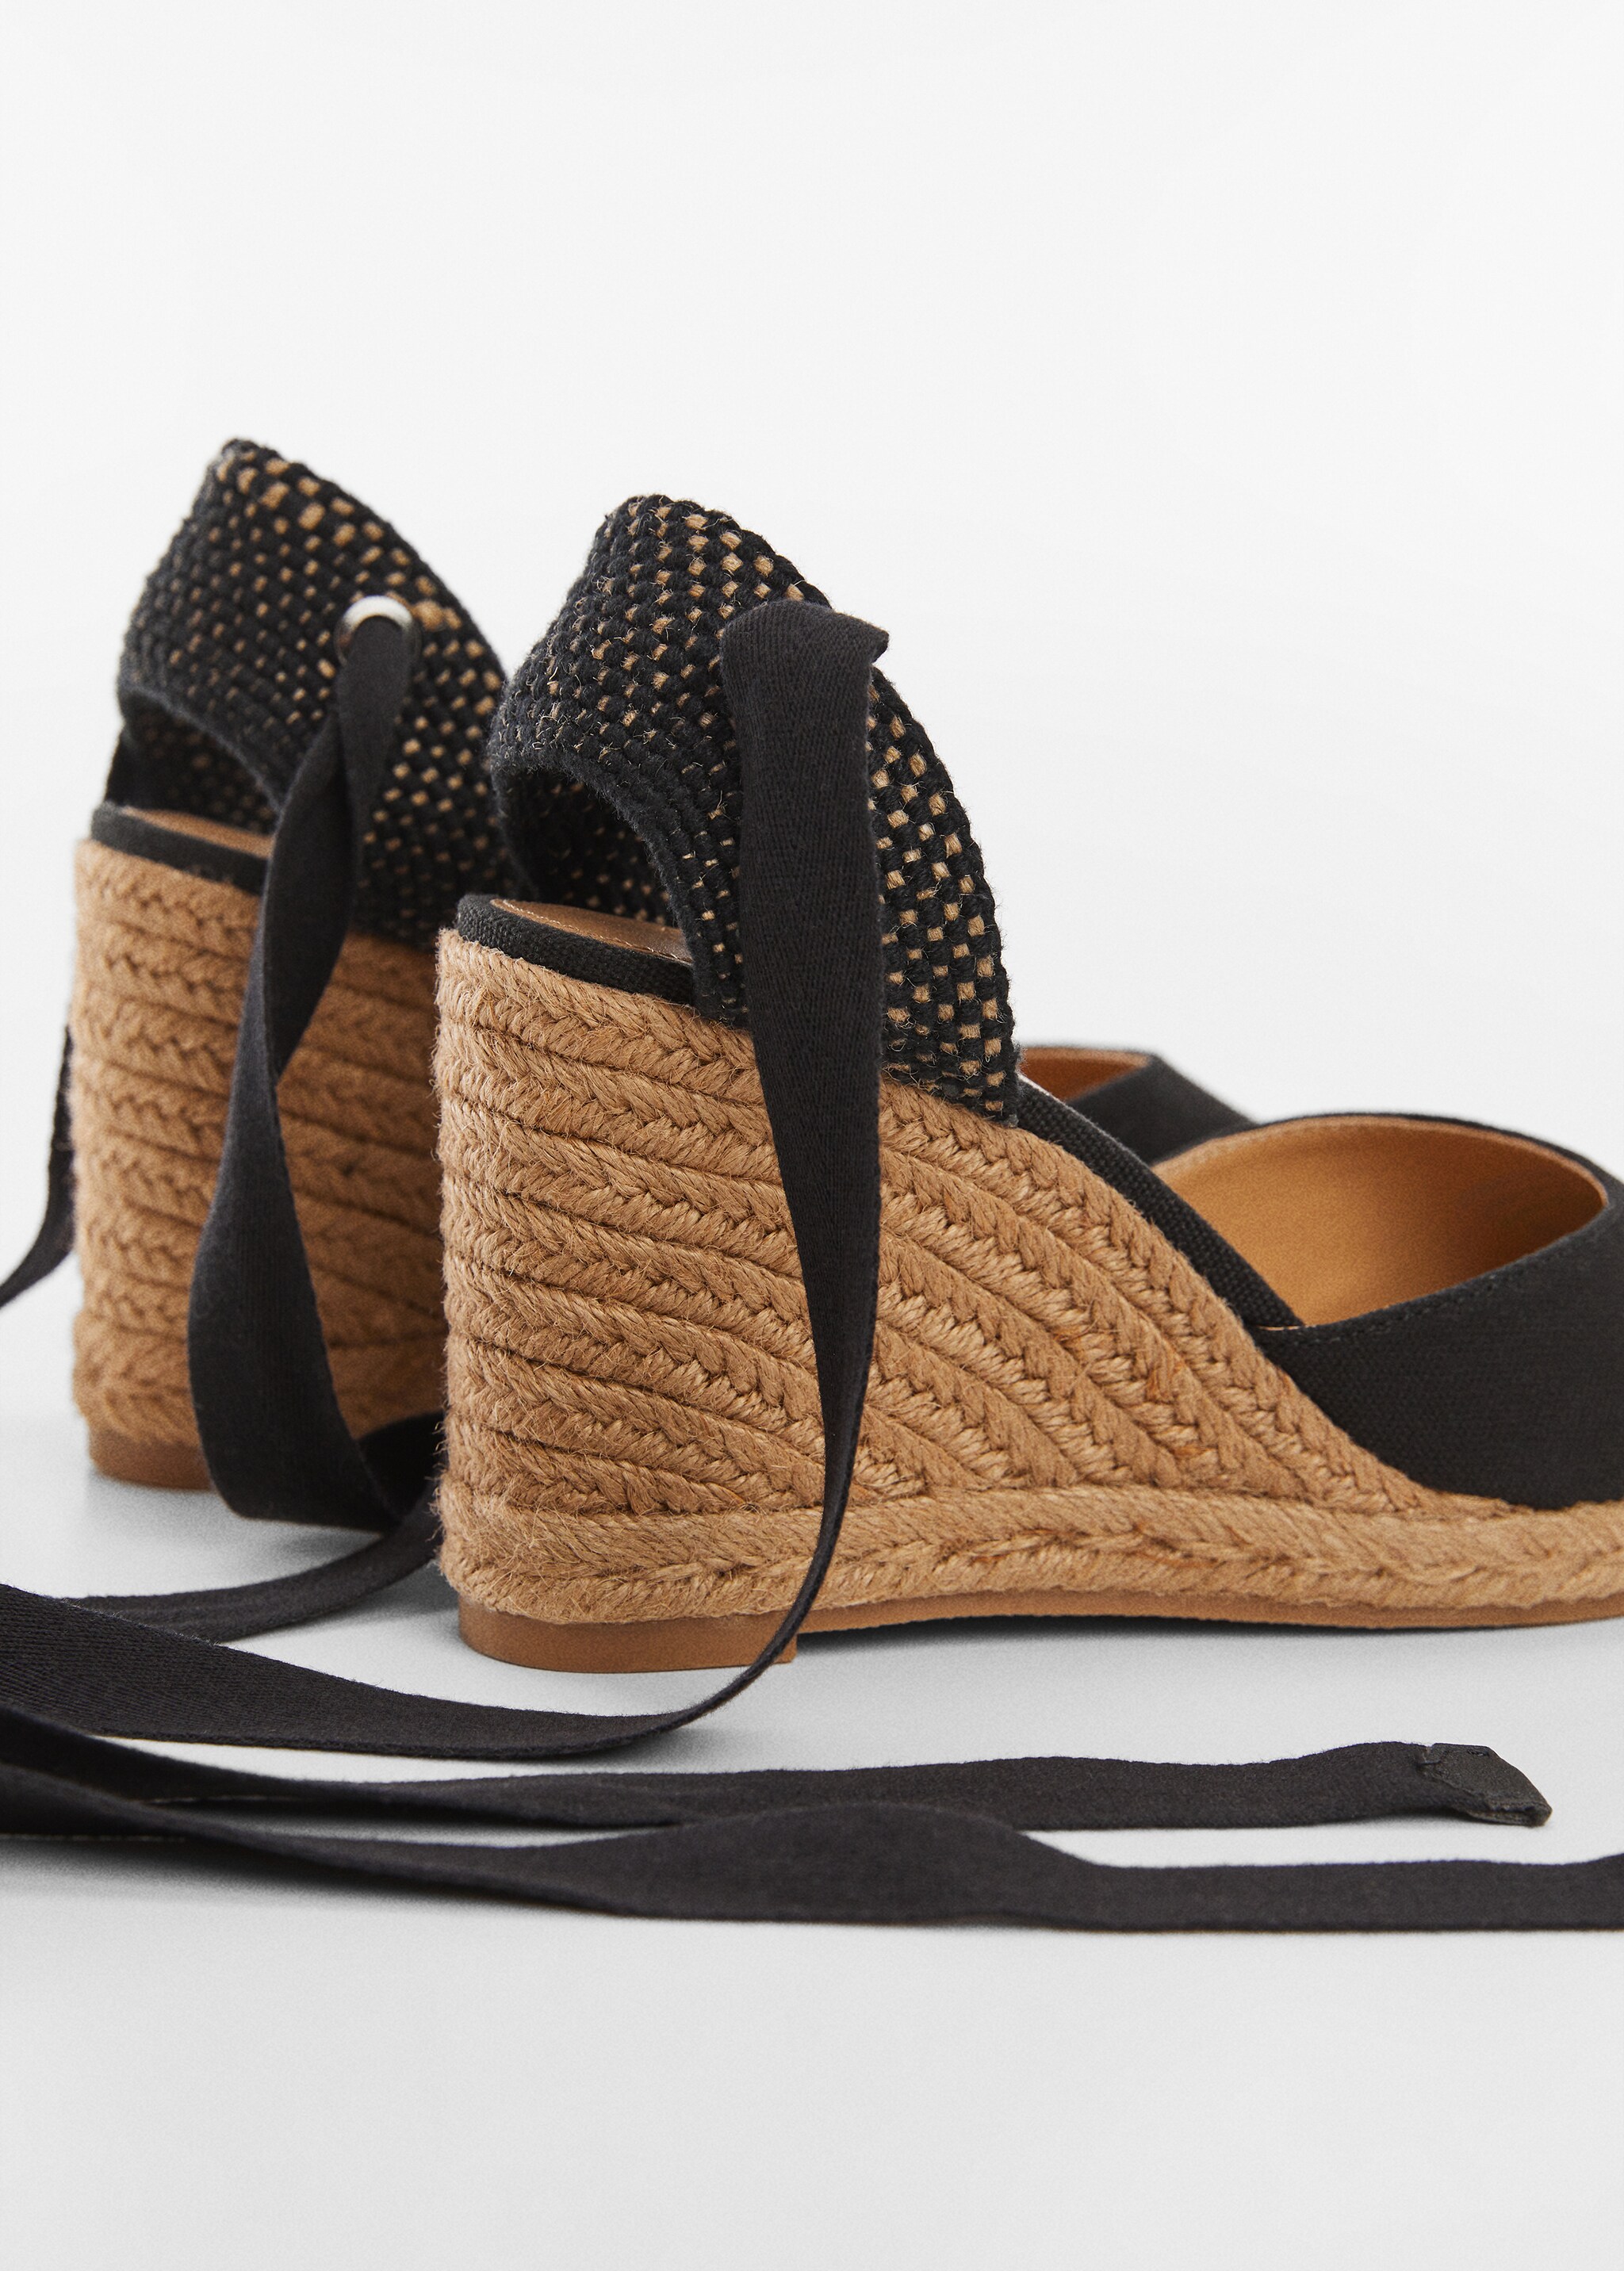 Lace-up espadrilles - Details of the article 1